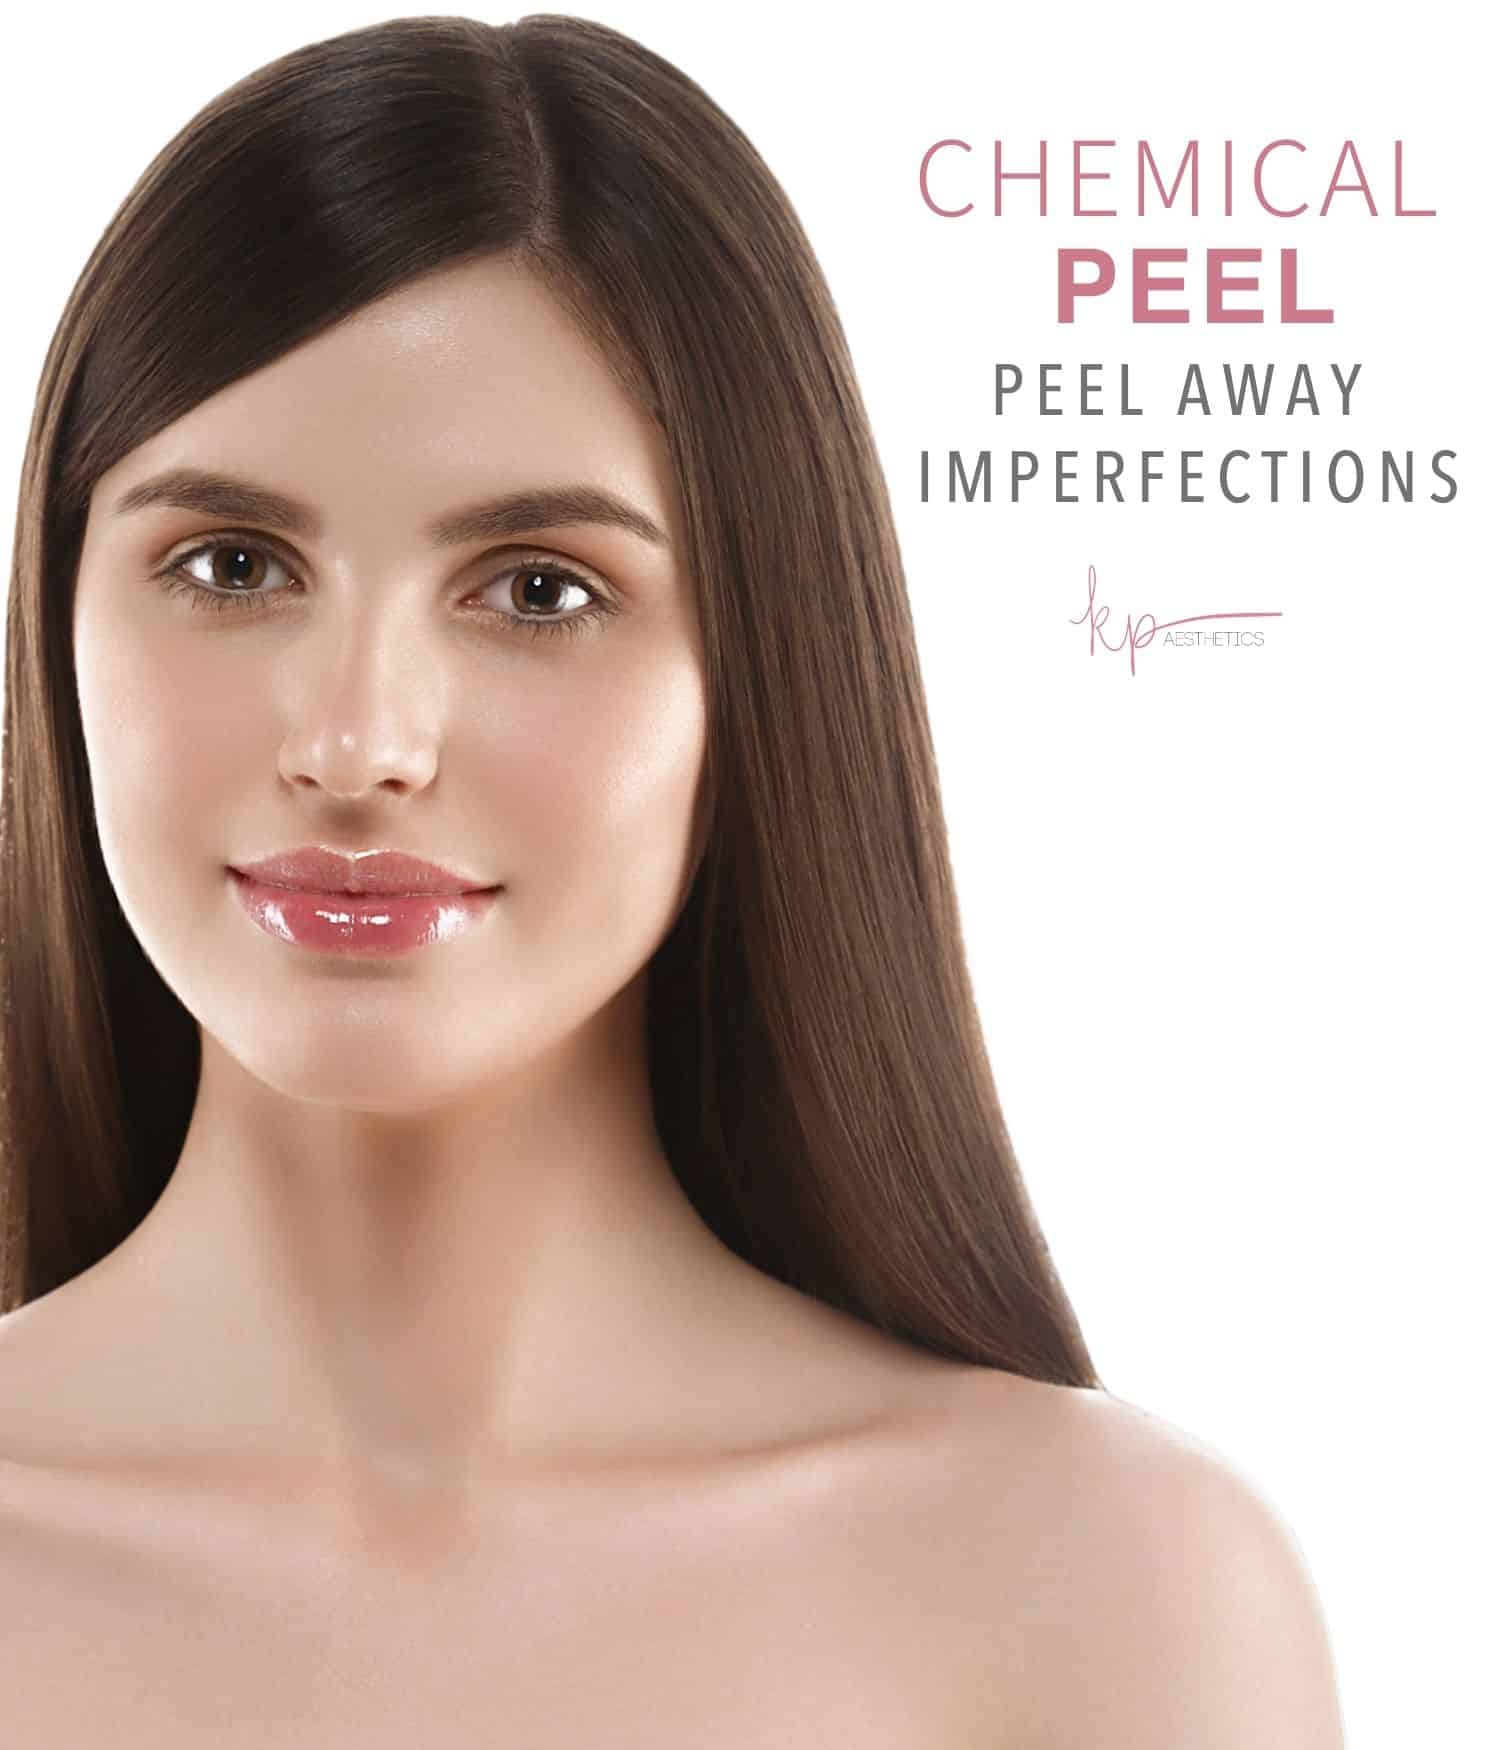 Woman with clear skin after chemical peel.